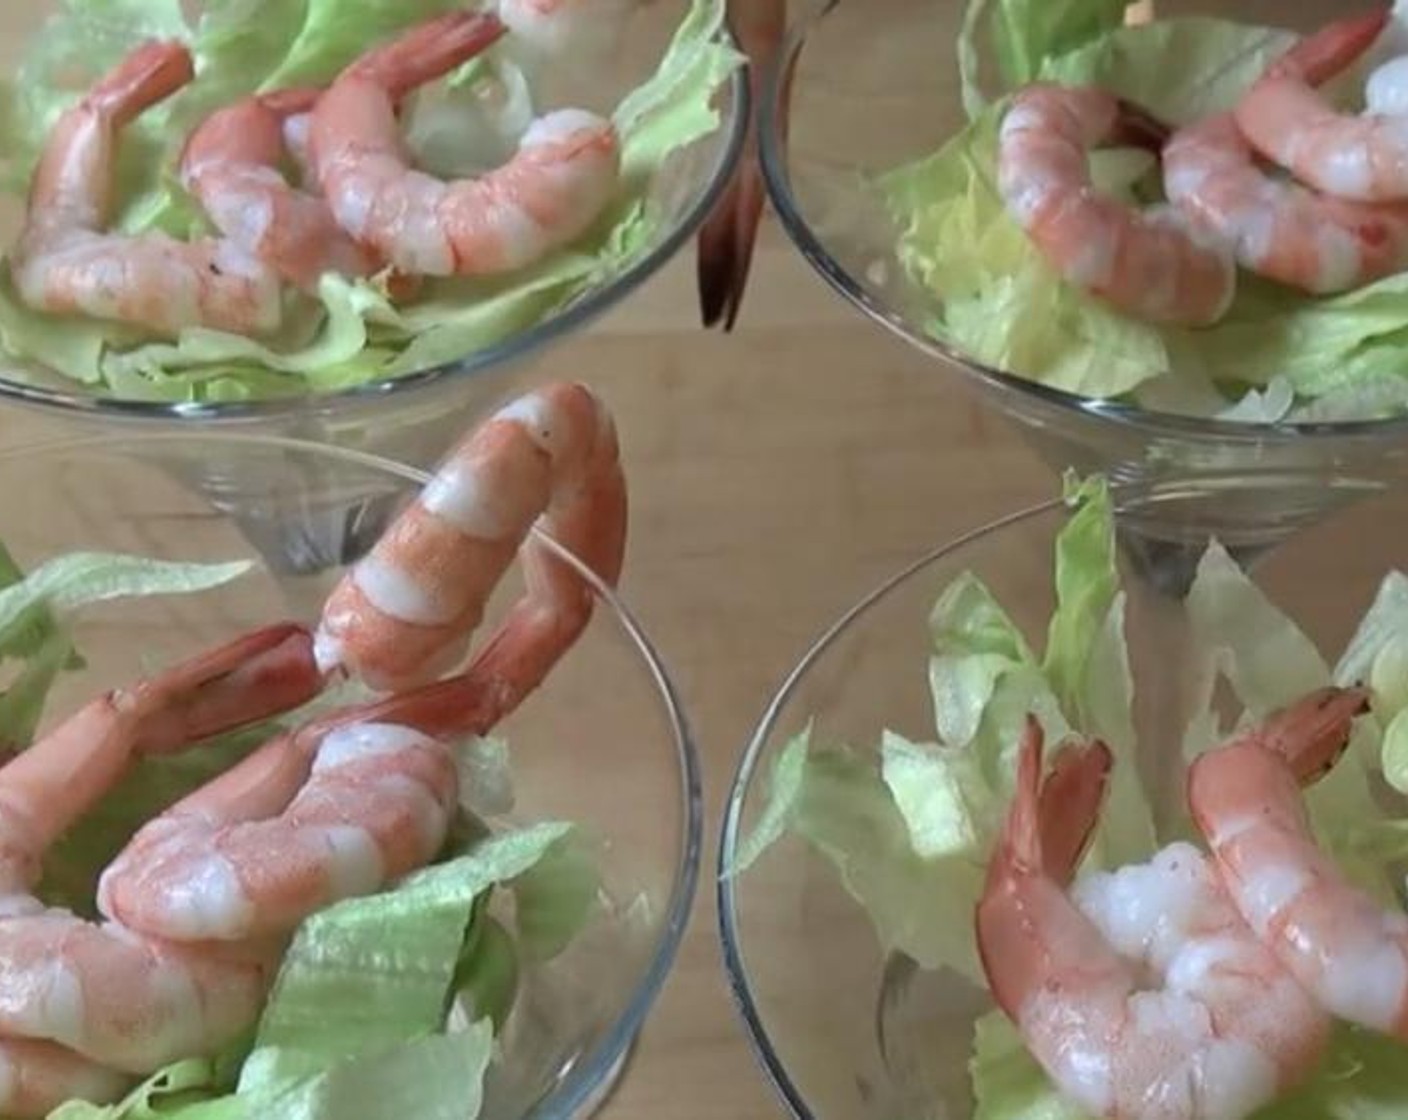 step 3 Place a little bit of Shredded Iceberg Lettuce (as needed) into each glass. Add the Prawns (1.3 lb) in the middle of each glass and add 1 hanging off the side for looks.